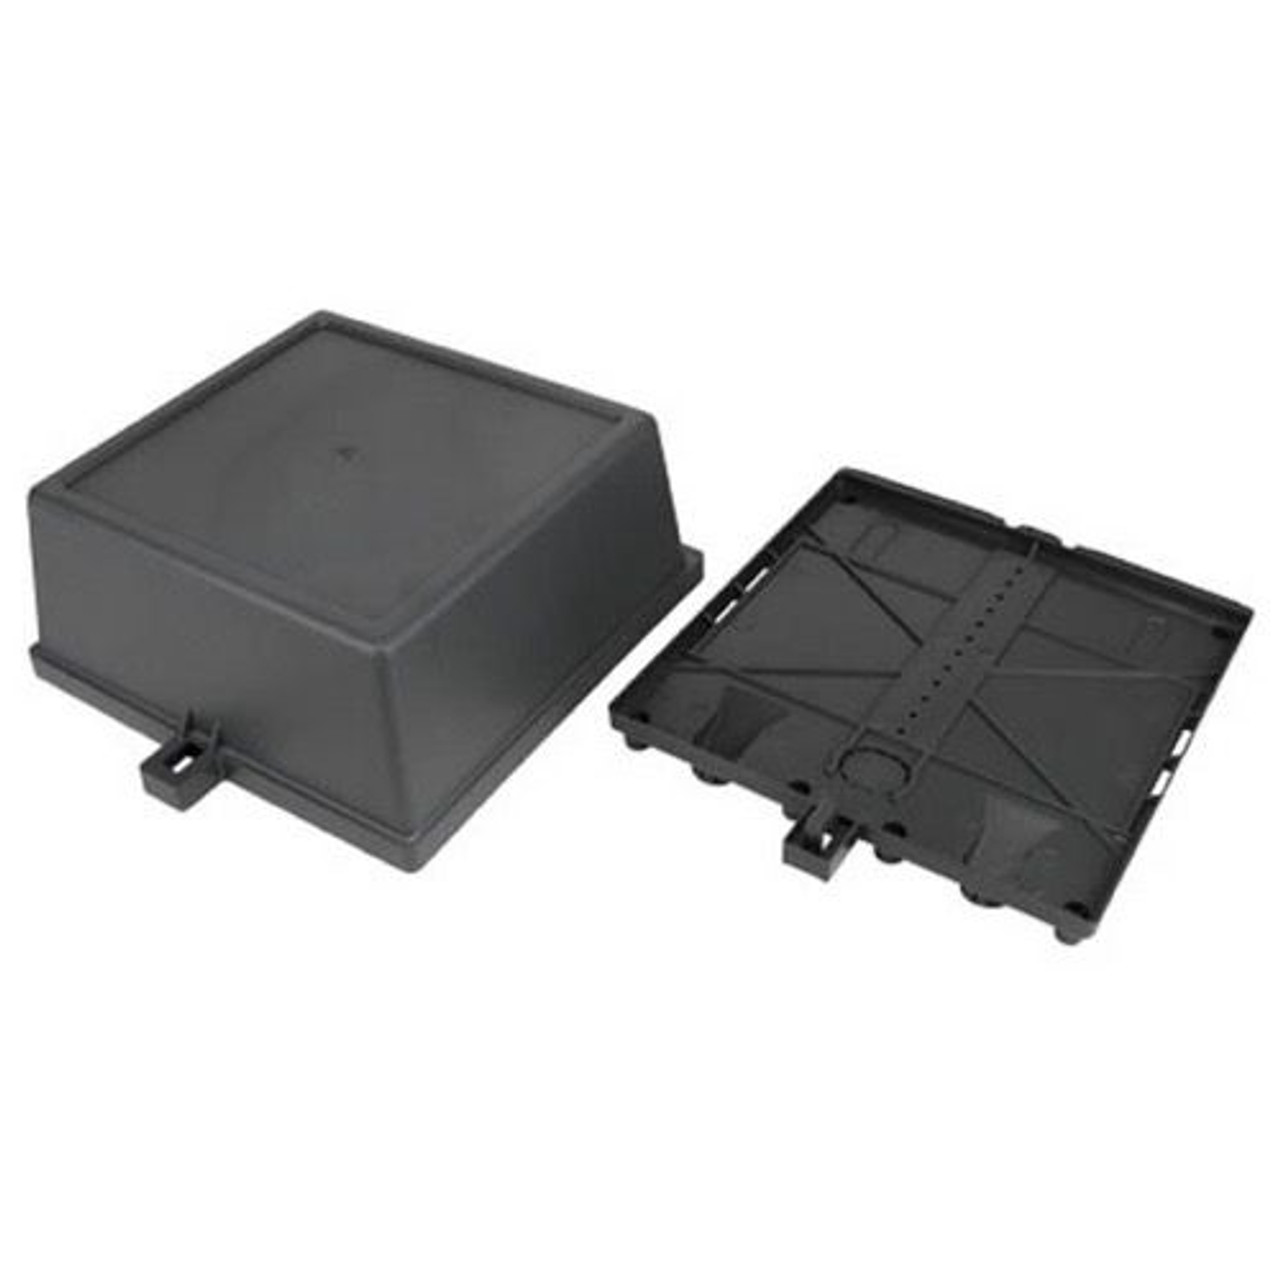 DirectTV Satellite Multi-switch PVC Enclosure Box 9.5H 9.5W 4.75D Outdoor DIRECTV Junction Heavy Duty Plastic Cable Service Weather Resistant Devise for Component / Electrical Wire Connector / Satellite Dish Multi Switch Cover